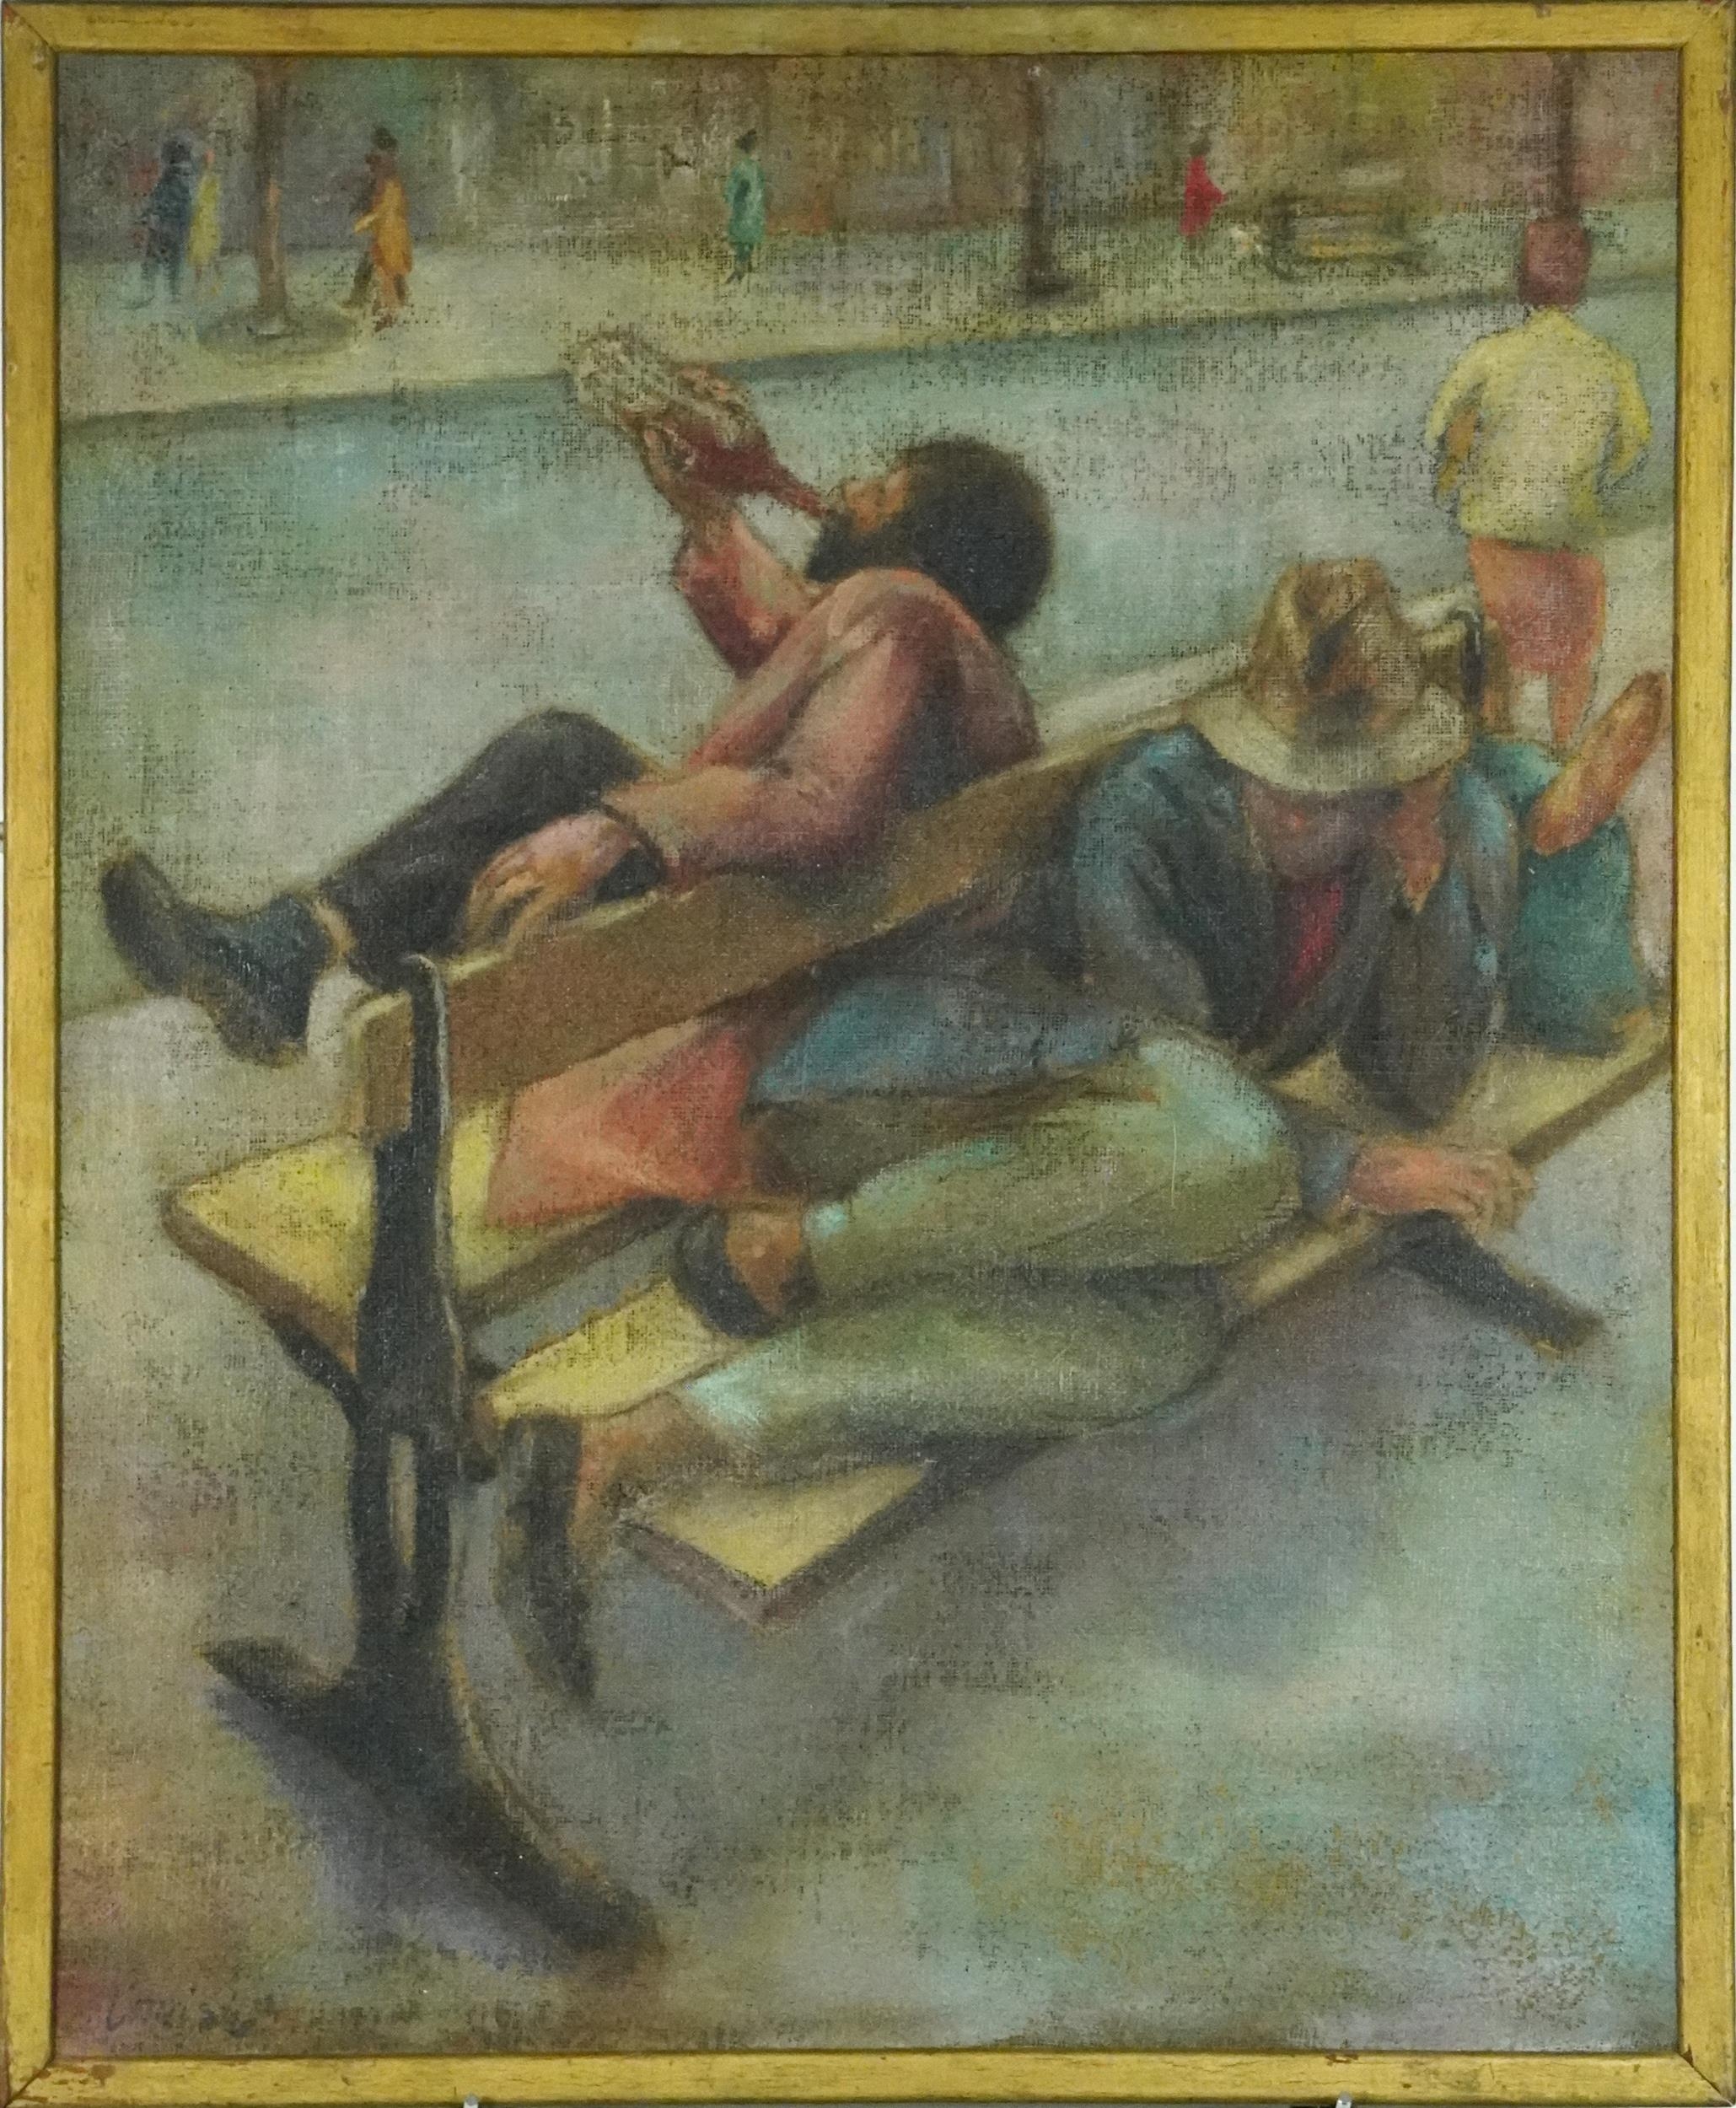 Attributed to Norman Cornish - Street life, post-war British oil on canvas, inscribed verso, framed, - Image 2 of 5